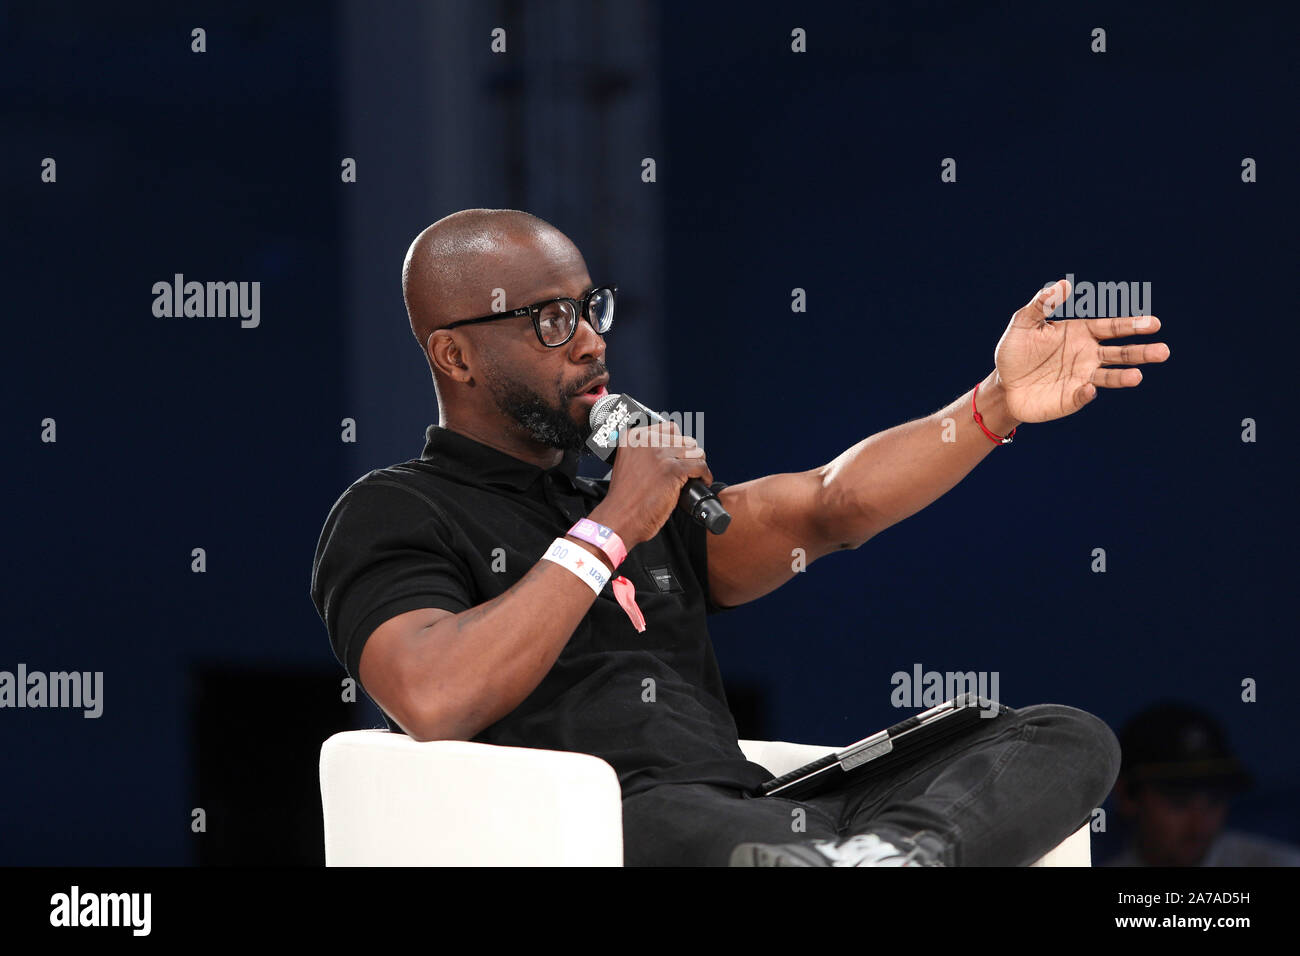 BEATMAKERS Producer's Panel featuring Bryan Michael Cox at the Revolt Summit x AT&T LA on October 25, 2019 at Magic Box in Los Angeles, California. Stock Photo